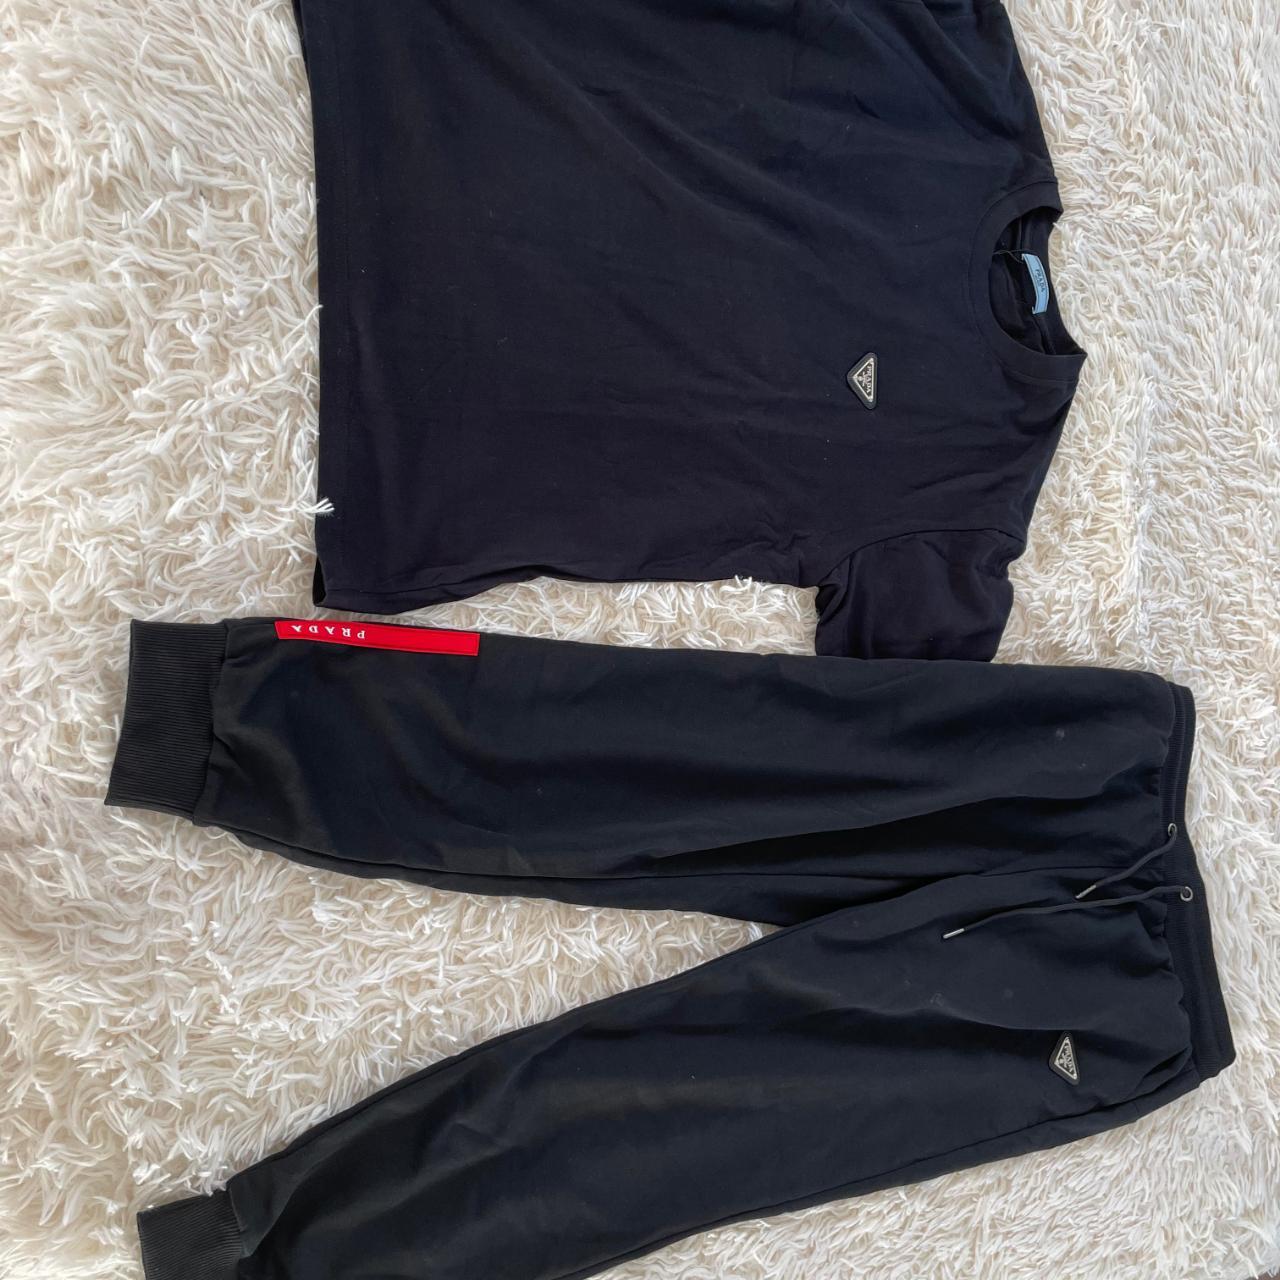 This is a Prada tracksuit. I have one available in... - Depop